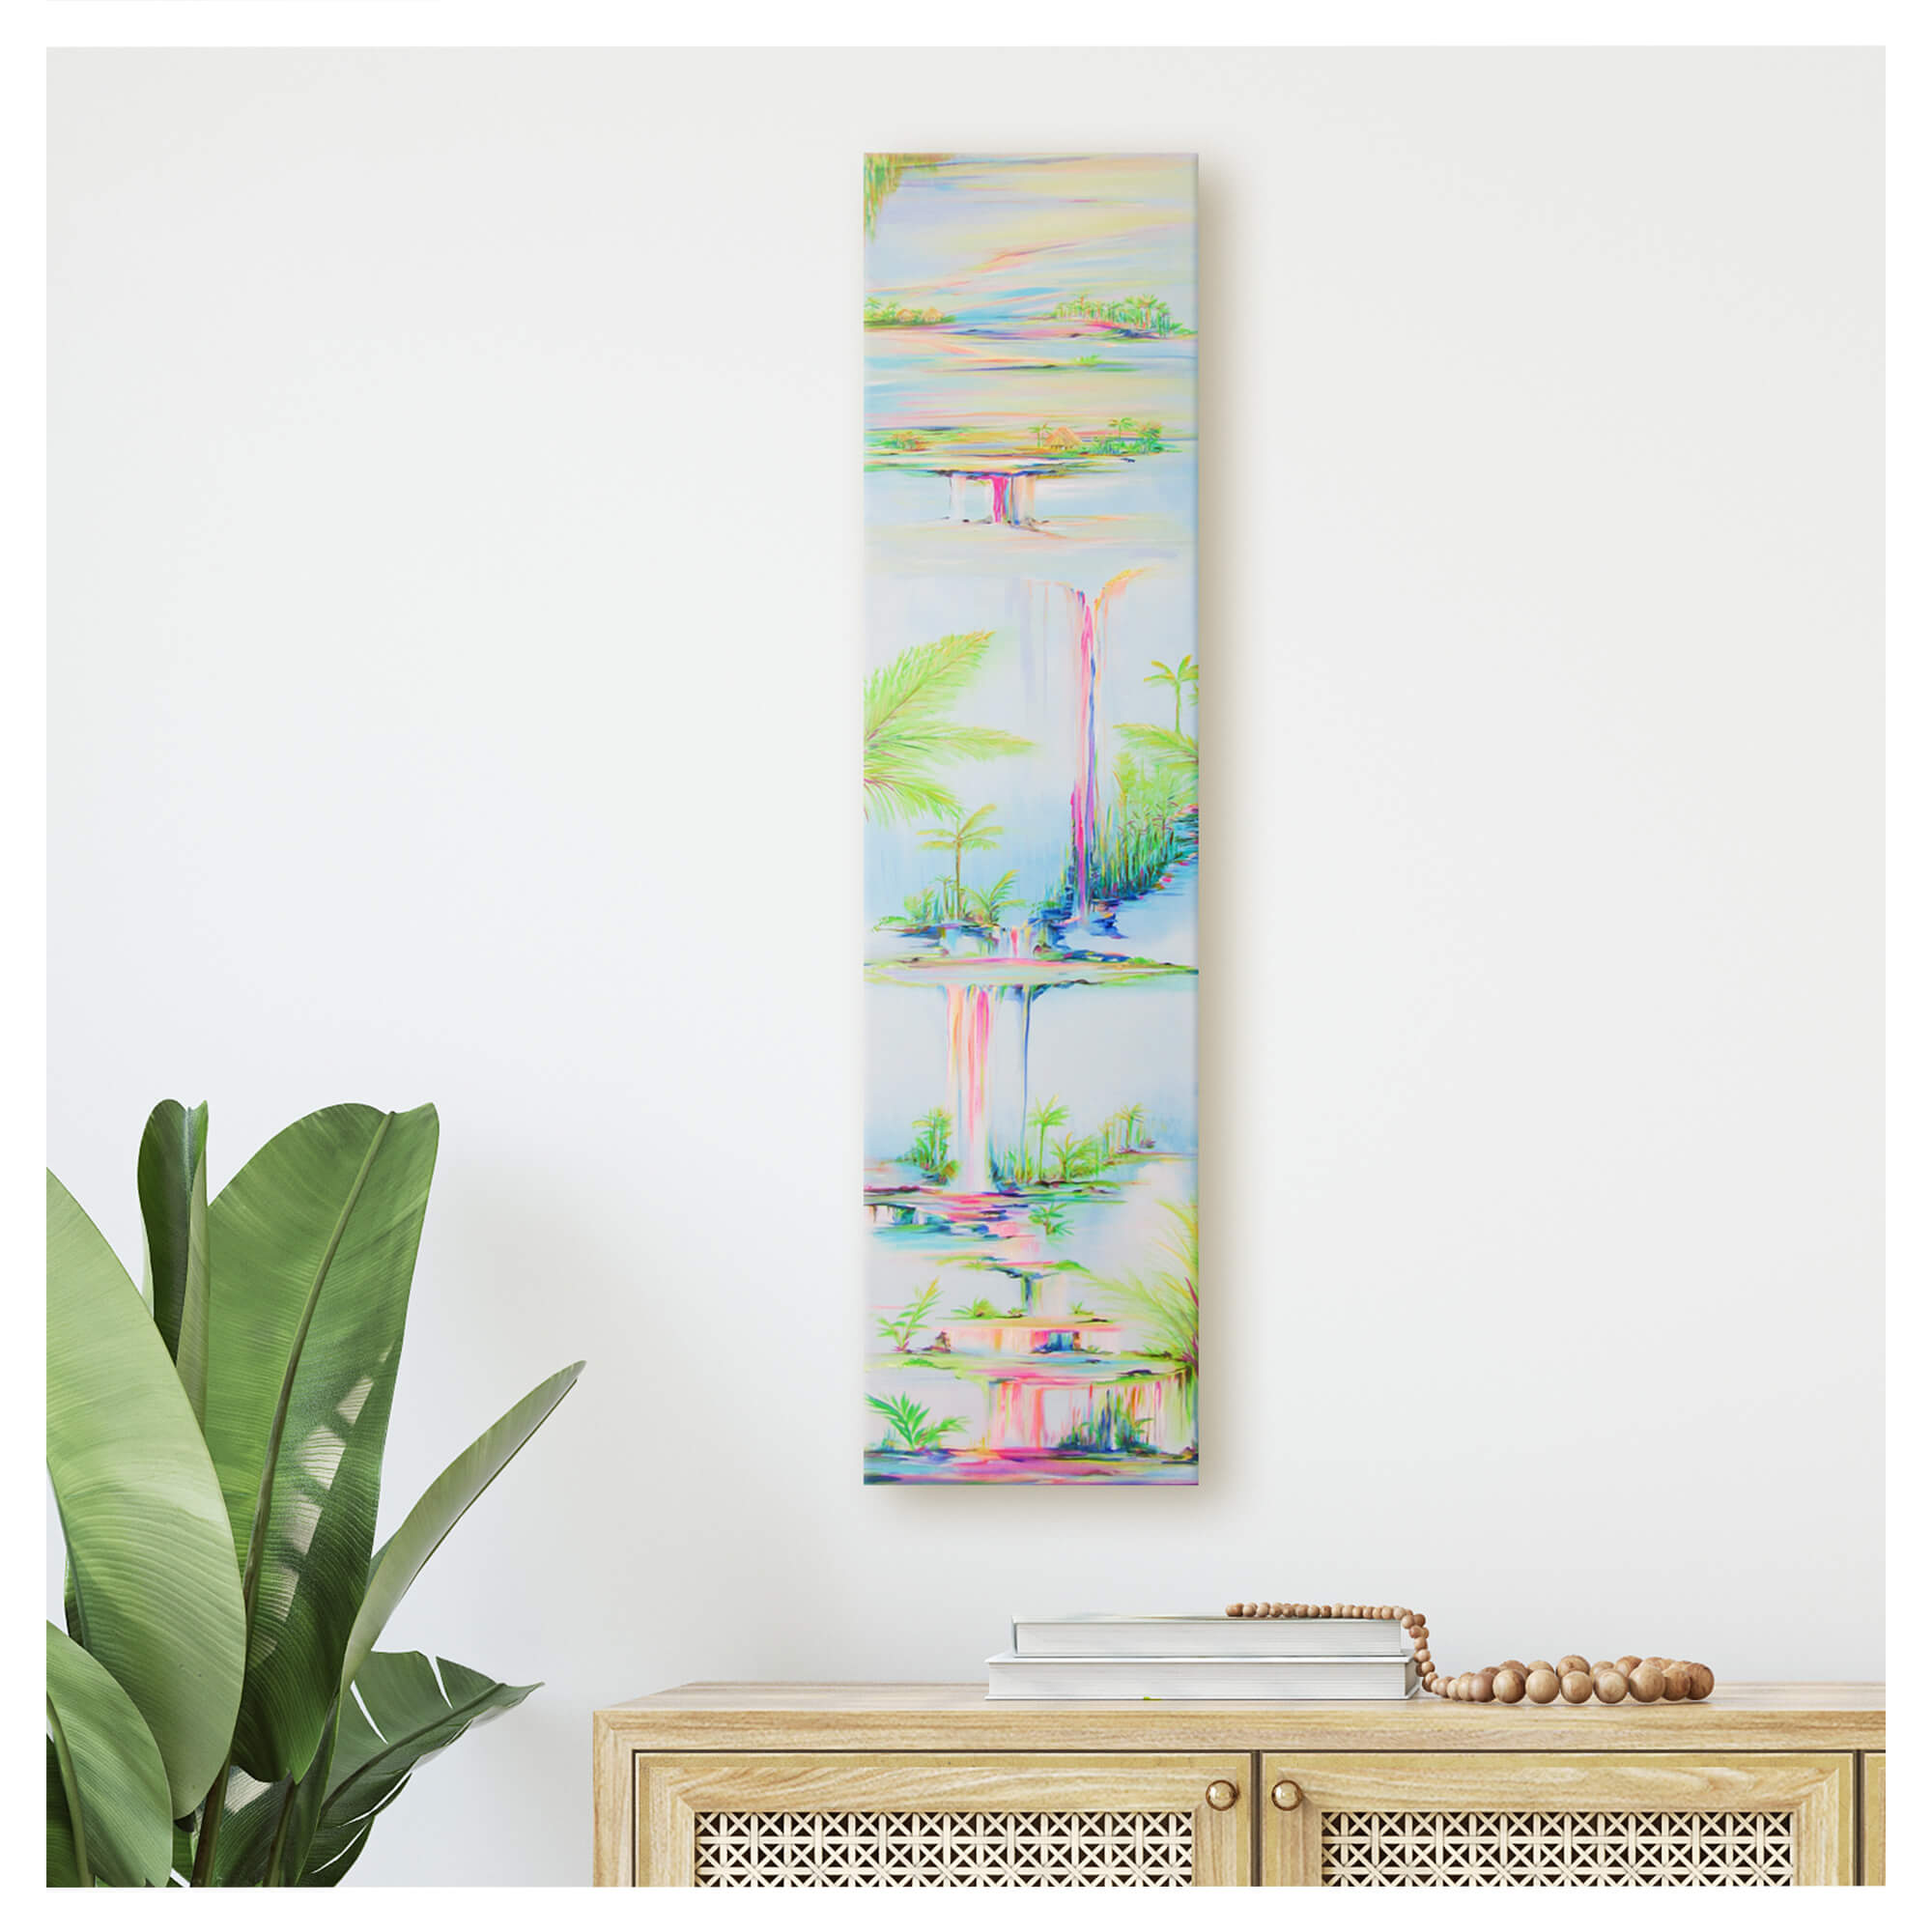 Pink flowing waters surrounded by vibrant colored tropical leaves by Hawaii artist Jess Burda